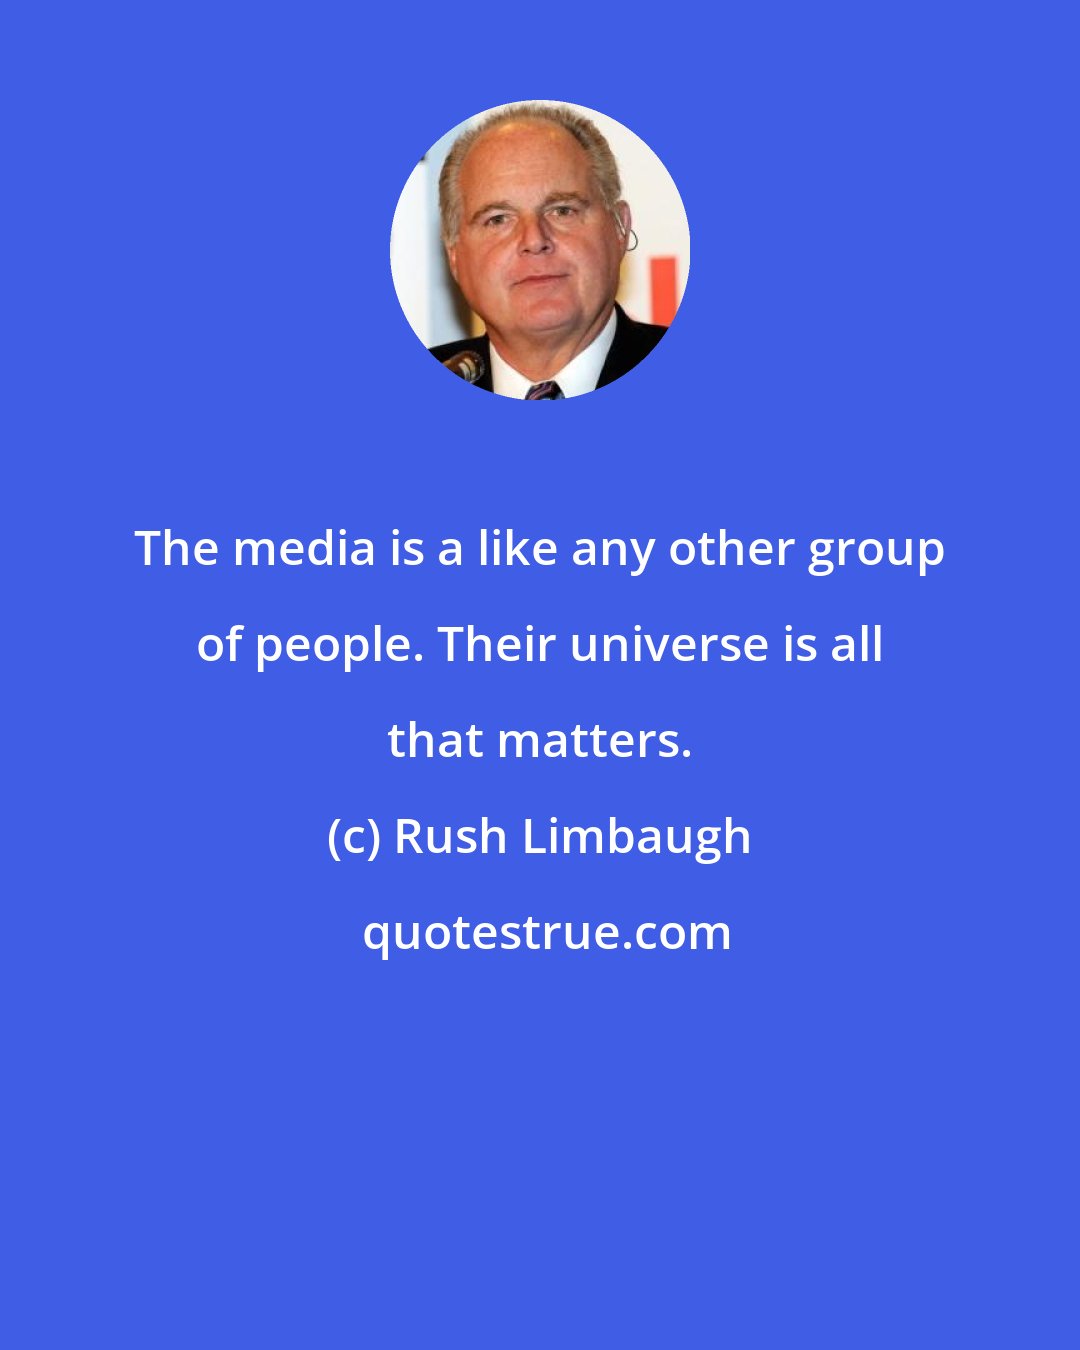 Rush Limbaugh: The media is a like any other group of people. Their universe is all that matters.